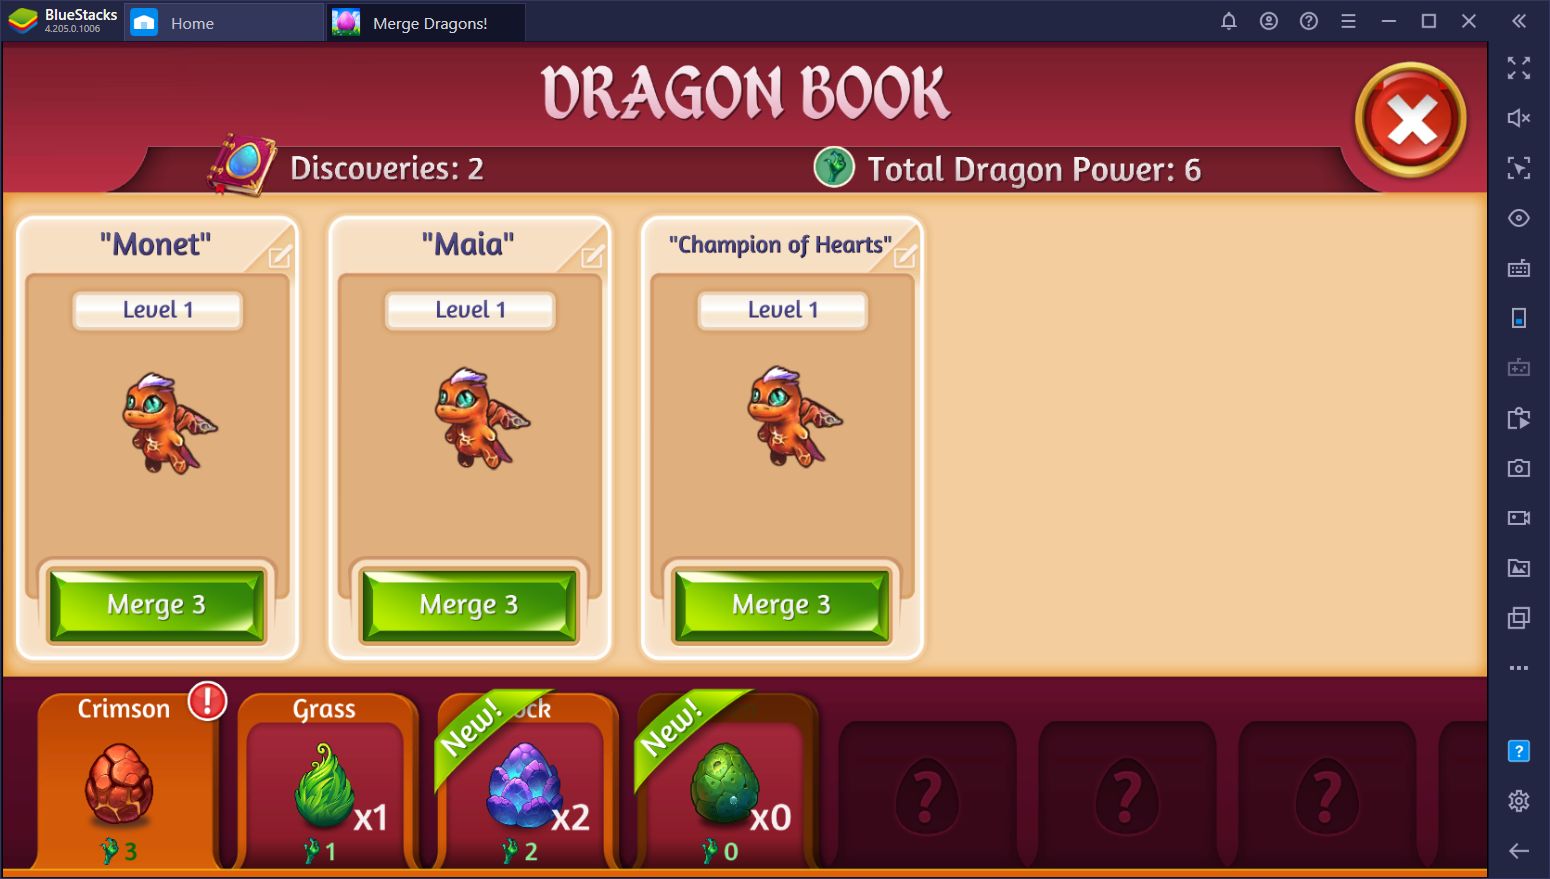 The Best Tips and Guides for Merge Dragons! on PC